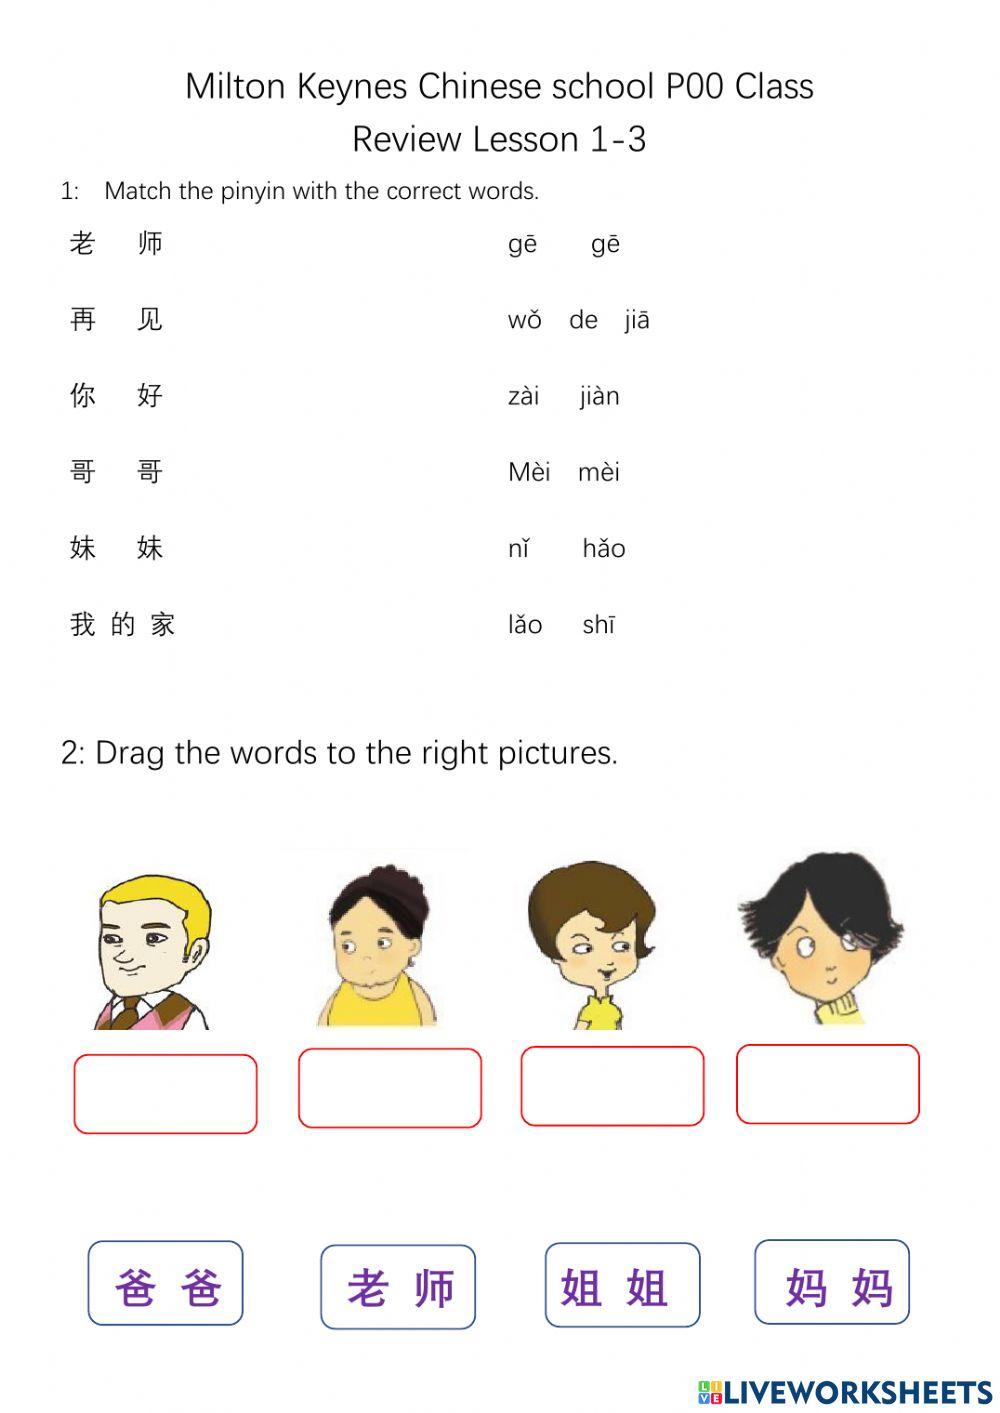 Let's learn Chinese